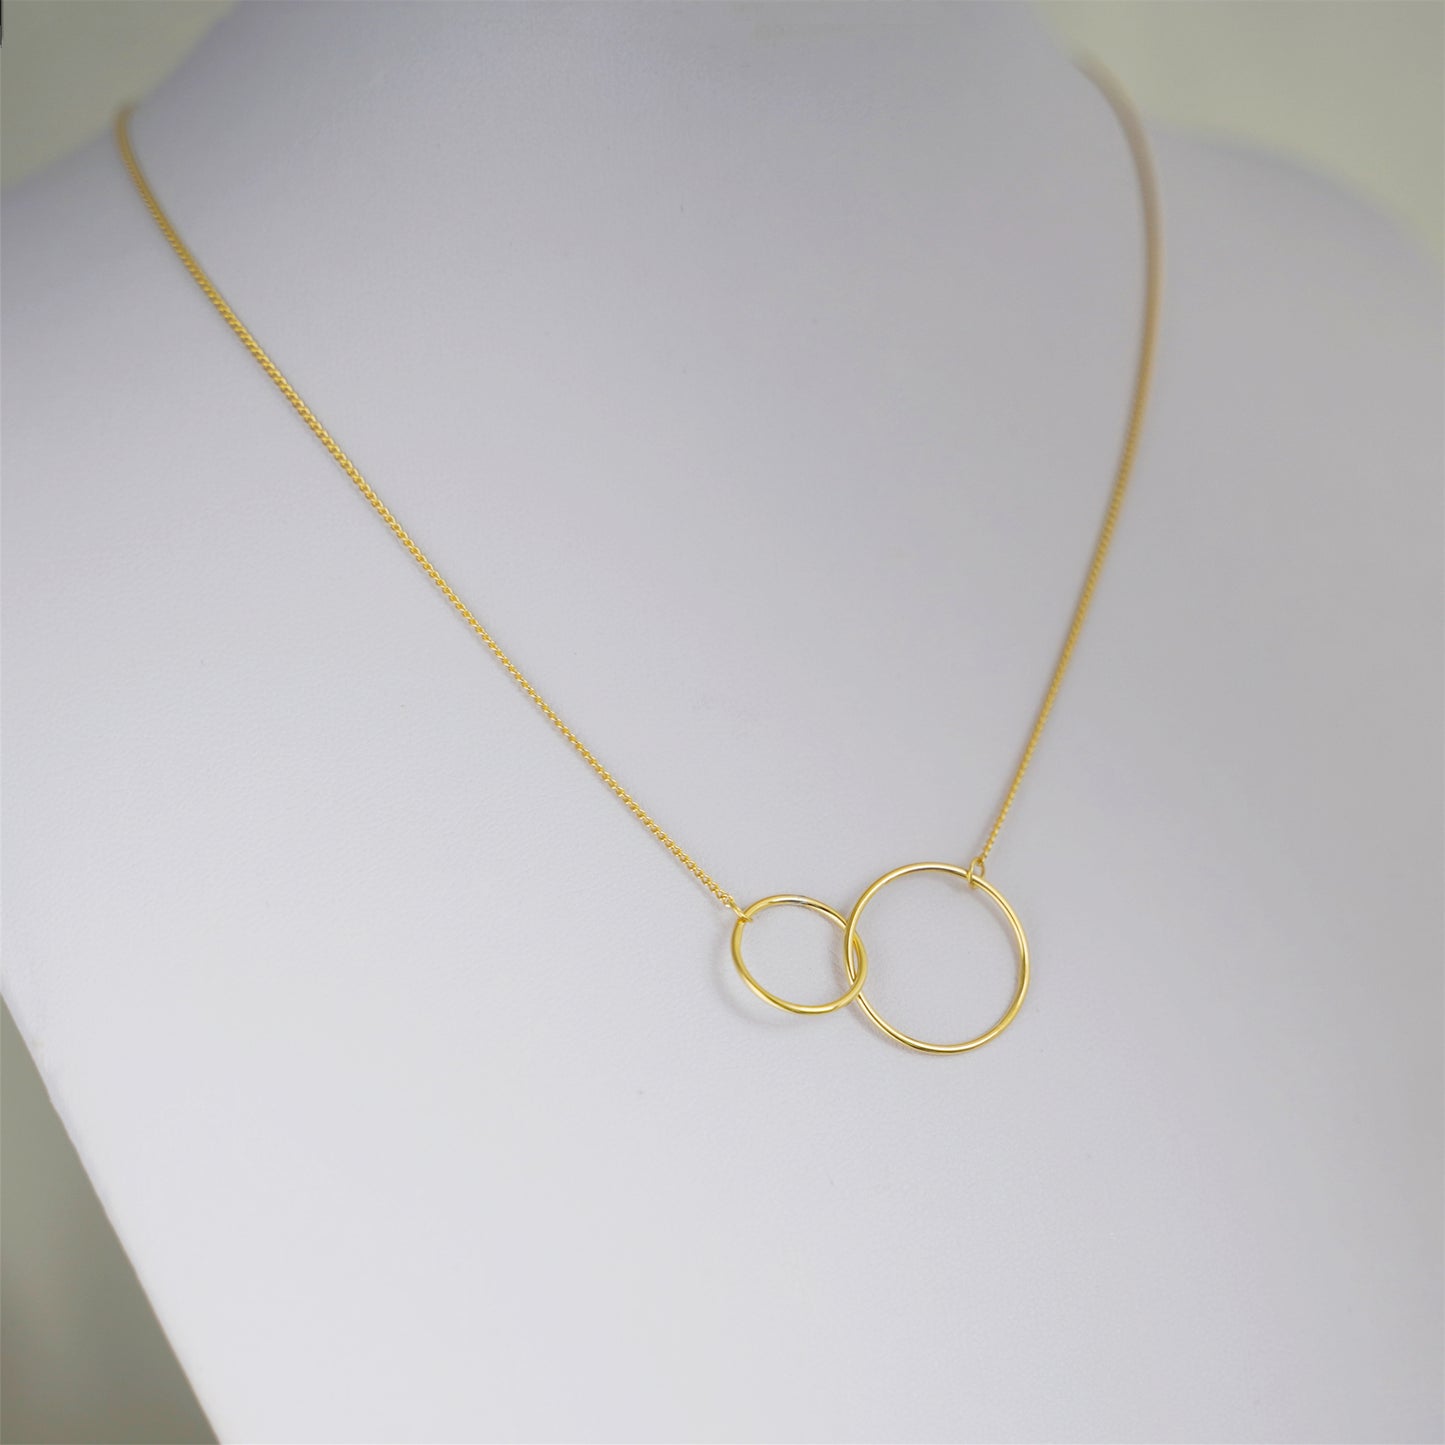 Linked Circles Eternity Infinity Necklace in Sterling Silver (3 Tones) - sugarkittenlondon